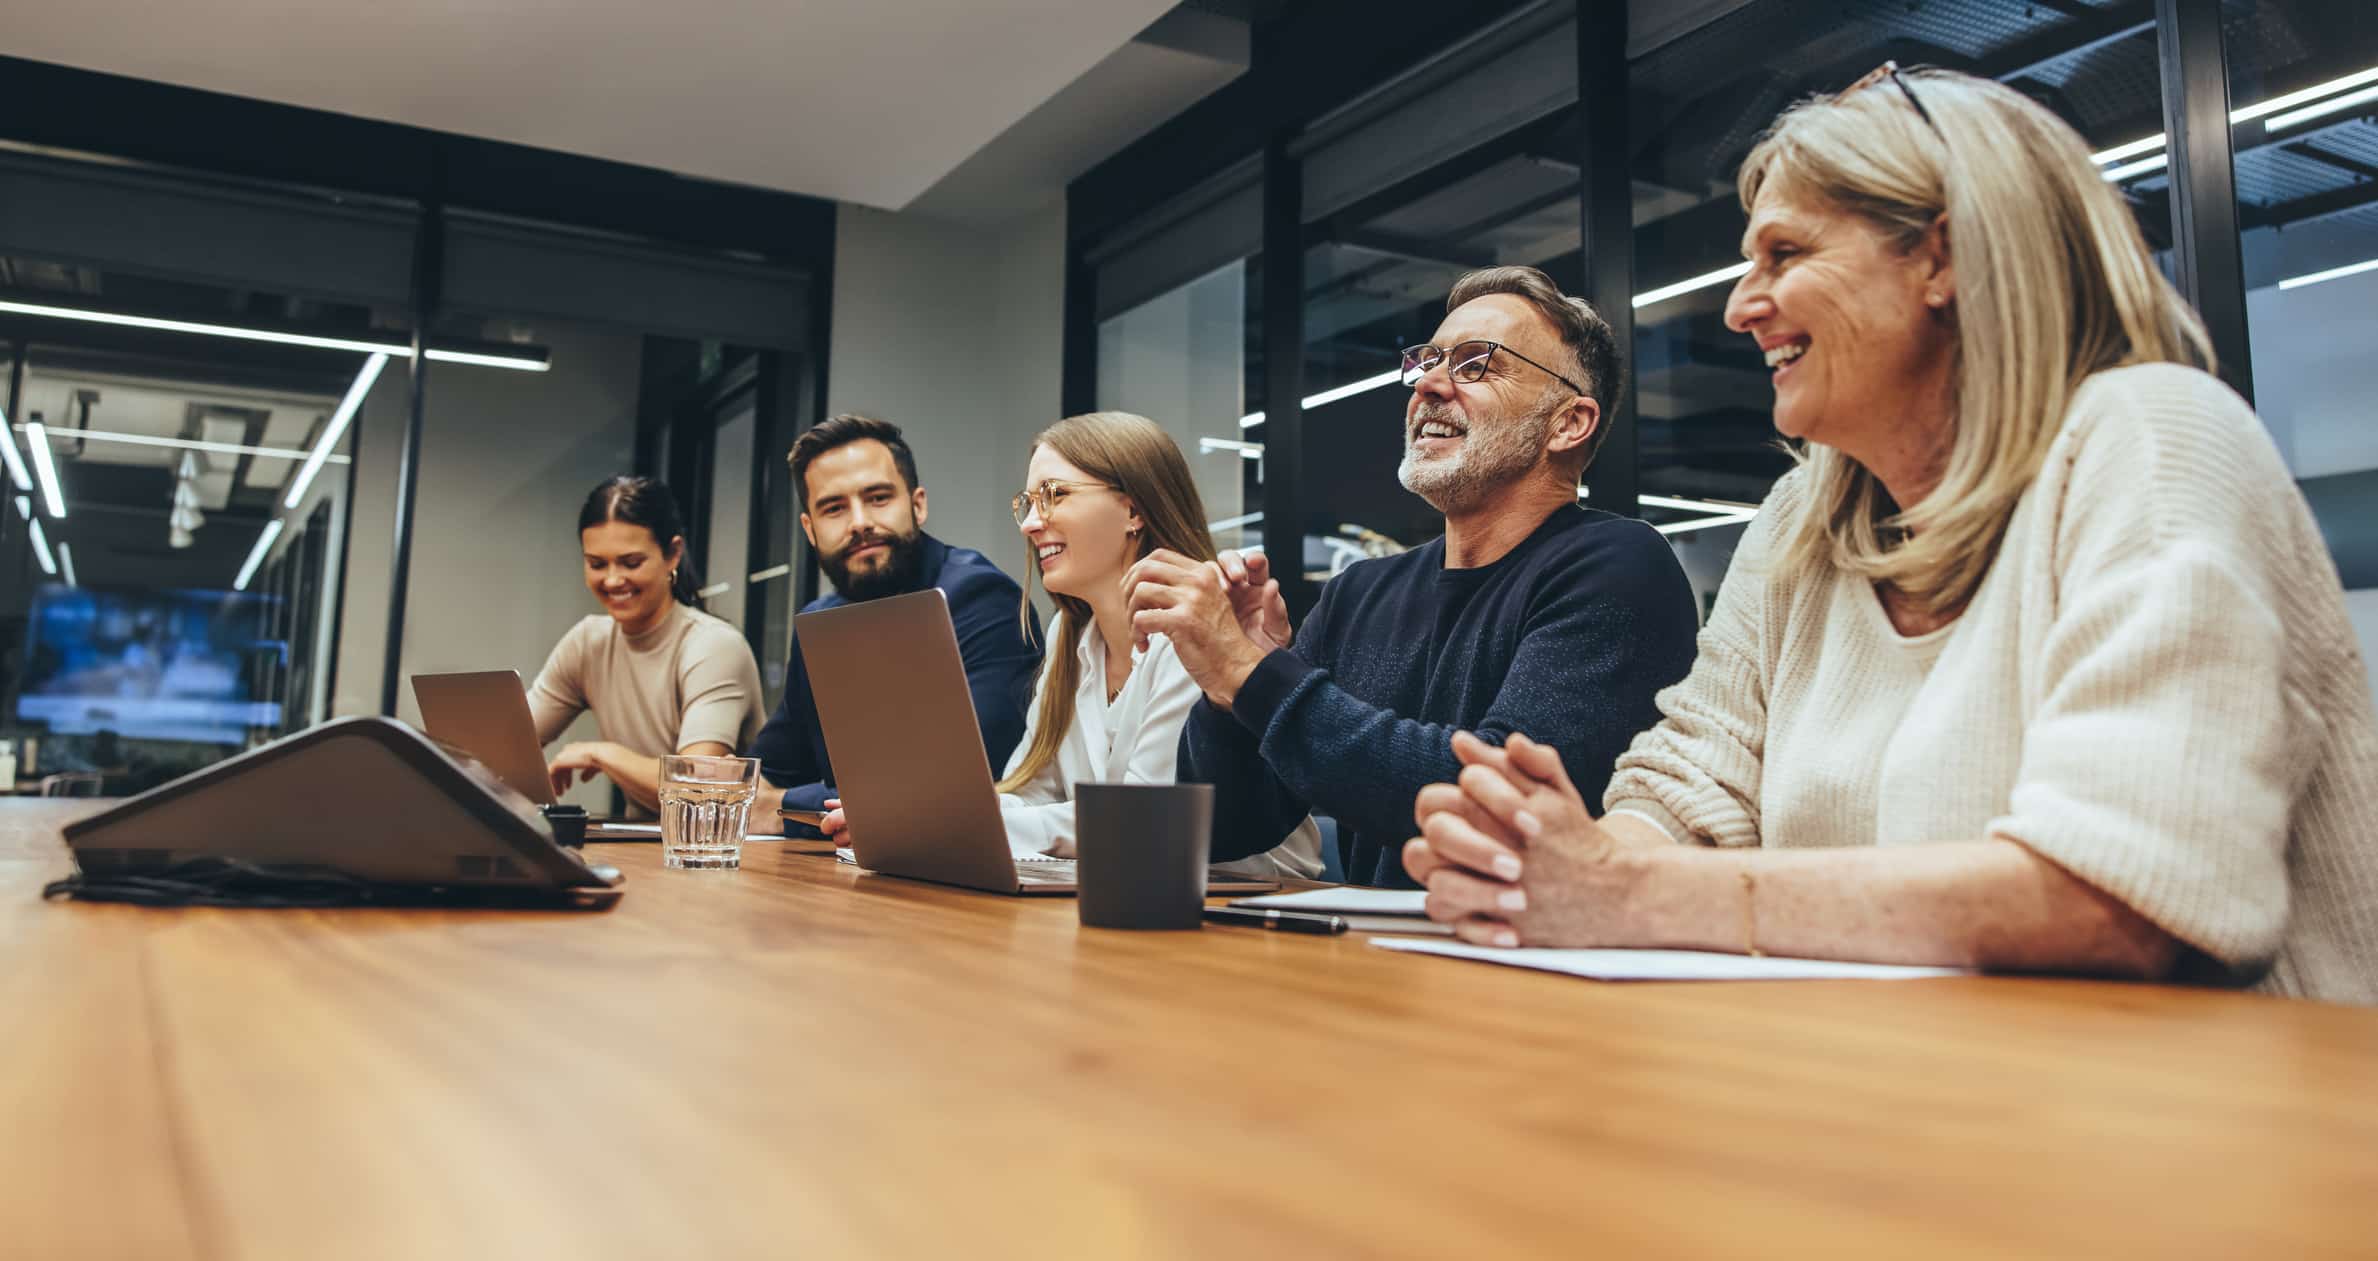 Cheerful business professionals laughing during a briefing. Group of happy businesspeople enjoying working together in a modern workplace. Team of diverse colleagues having a meeting in a boardroom.